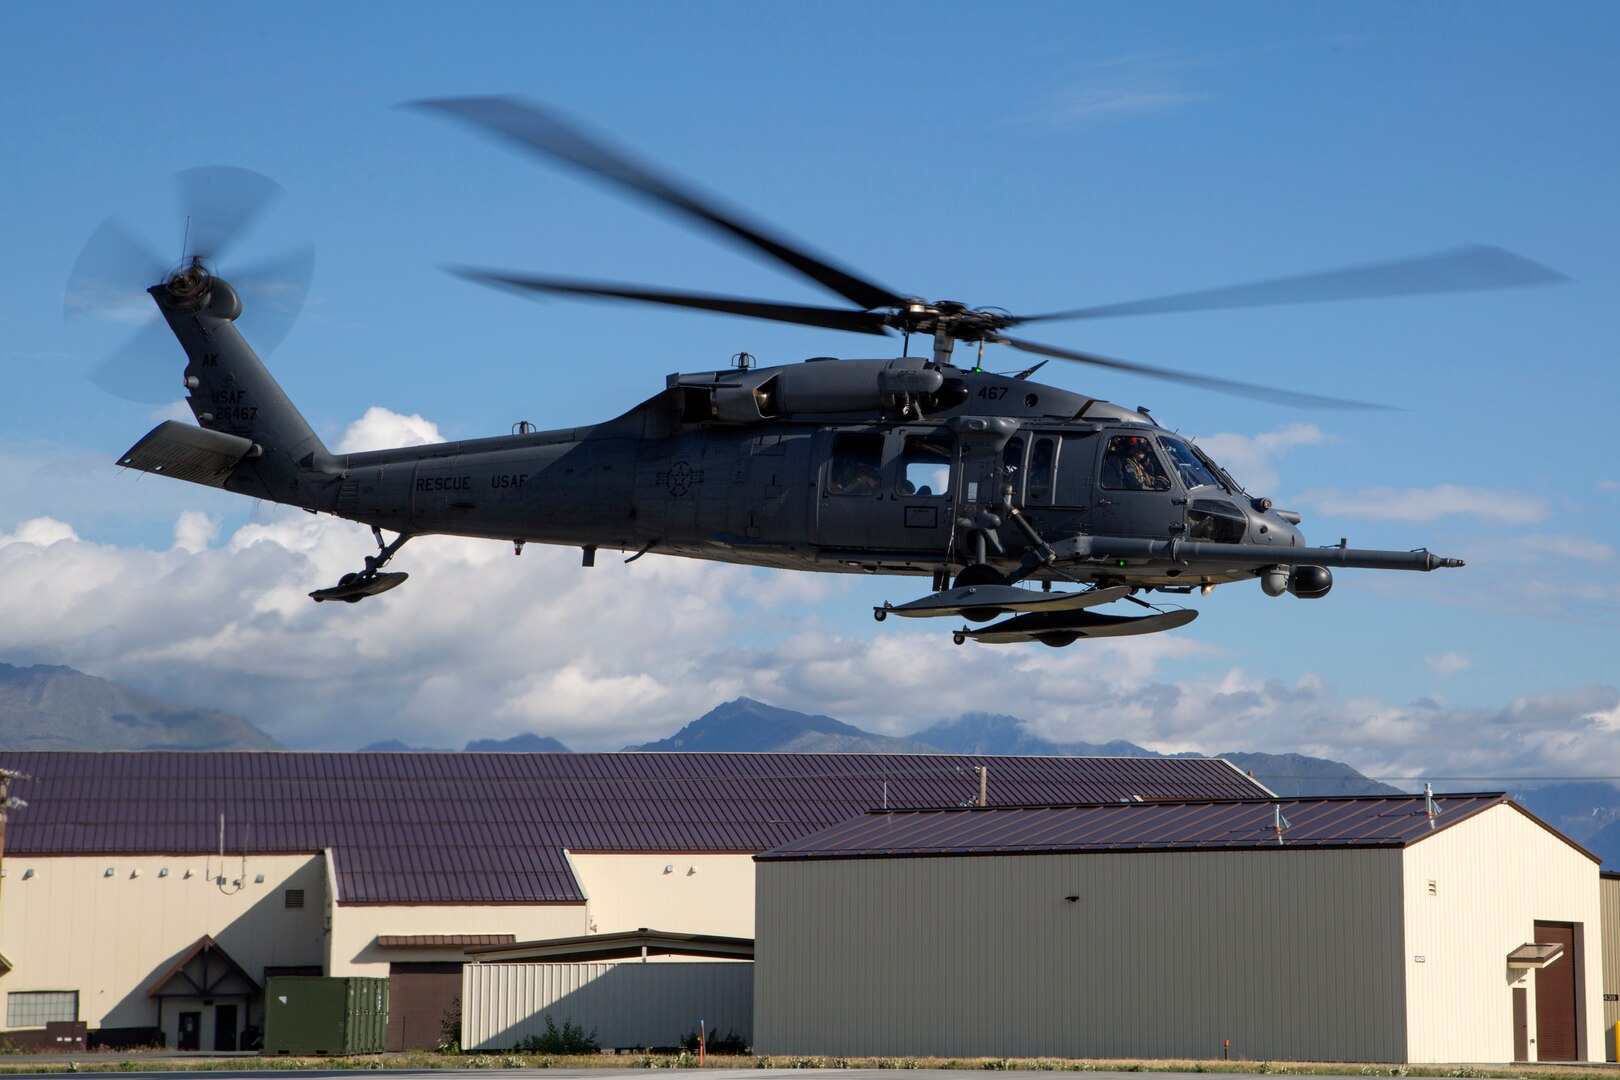 An Alaska Air National Guard HH-60G Pave Hawk helicopter, assigned to the 210th Rescue Squadron, takes off from Joint Base Elmendorf-Richardson, Alaska, July 23, 2015. The 210th Rescue Squadron provides emergency rescue services for the citizens of Alaska in addition to training for wartime combat search and rescue missions.